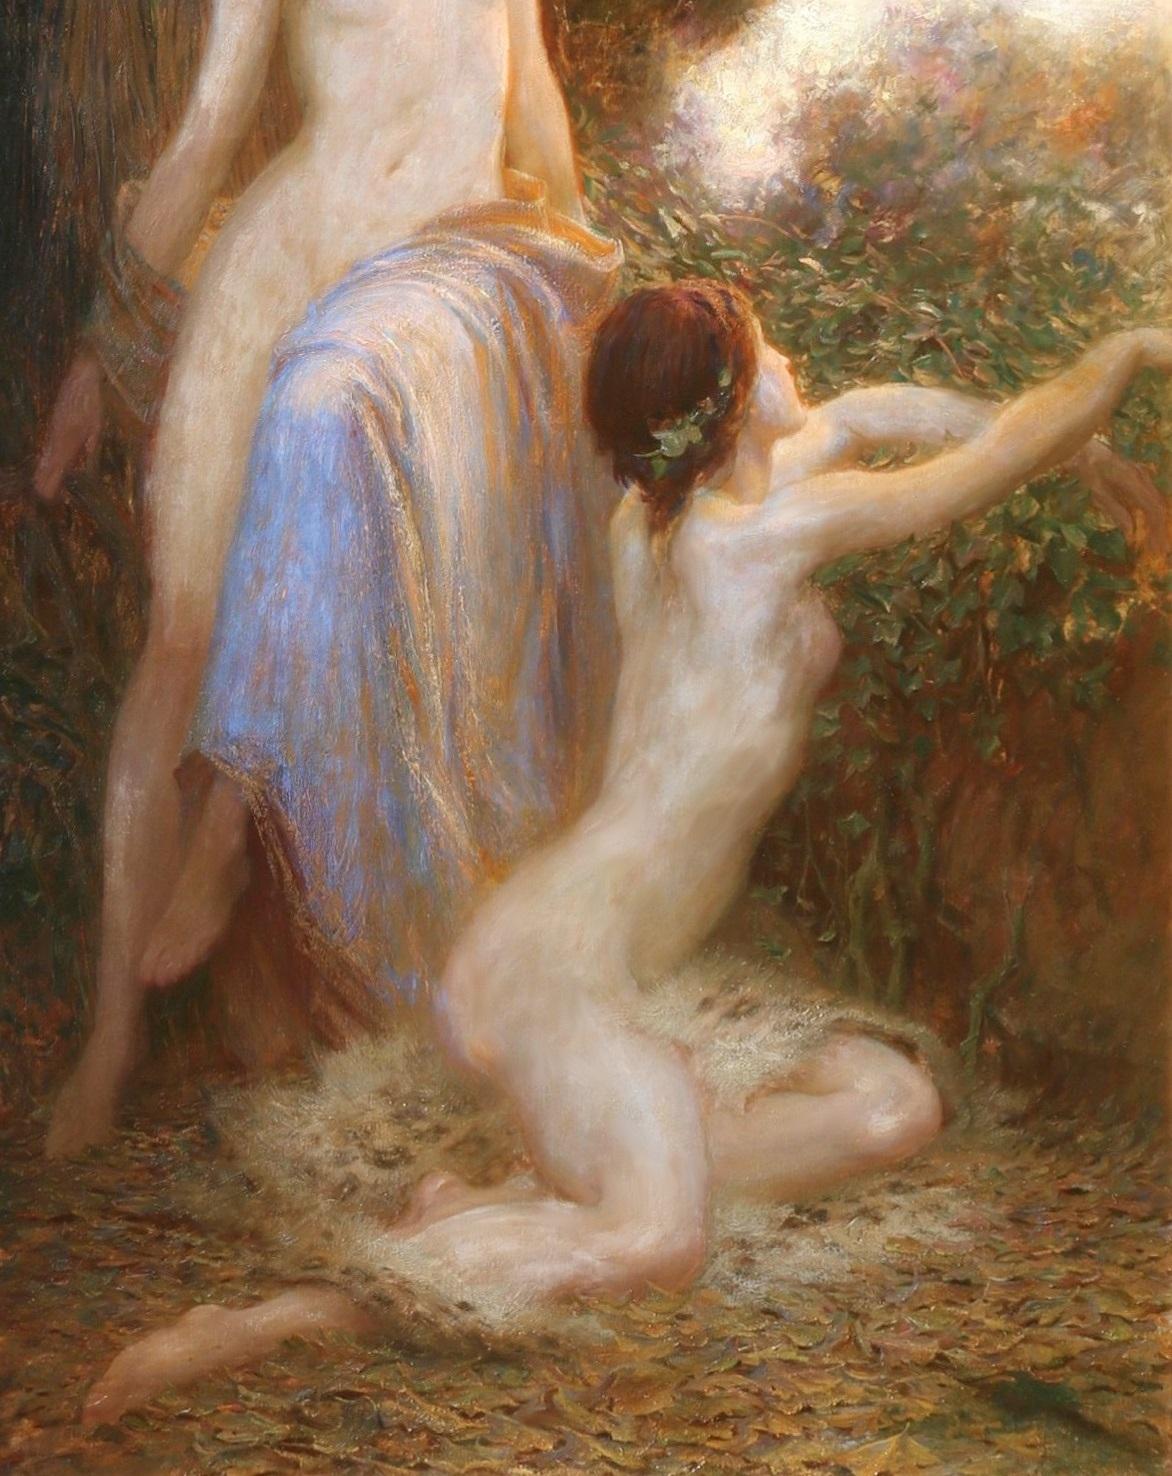 Awakening - Monumental Royal Academy Oil Painting of Neoclassical Nudes Nymphs  2